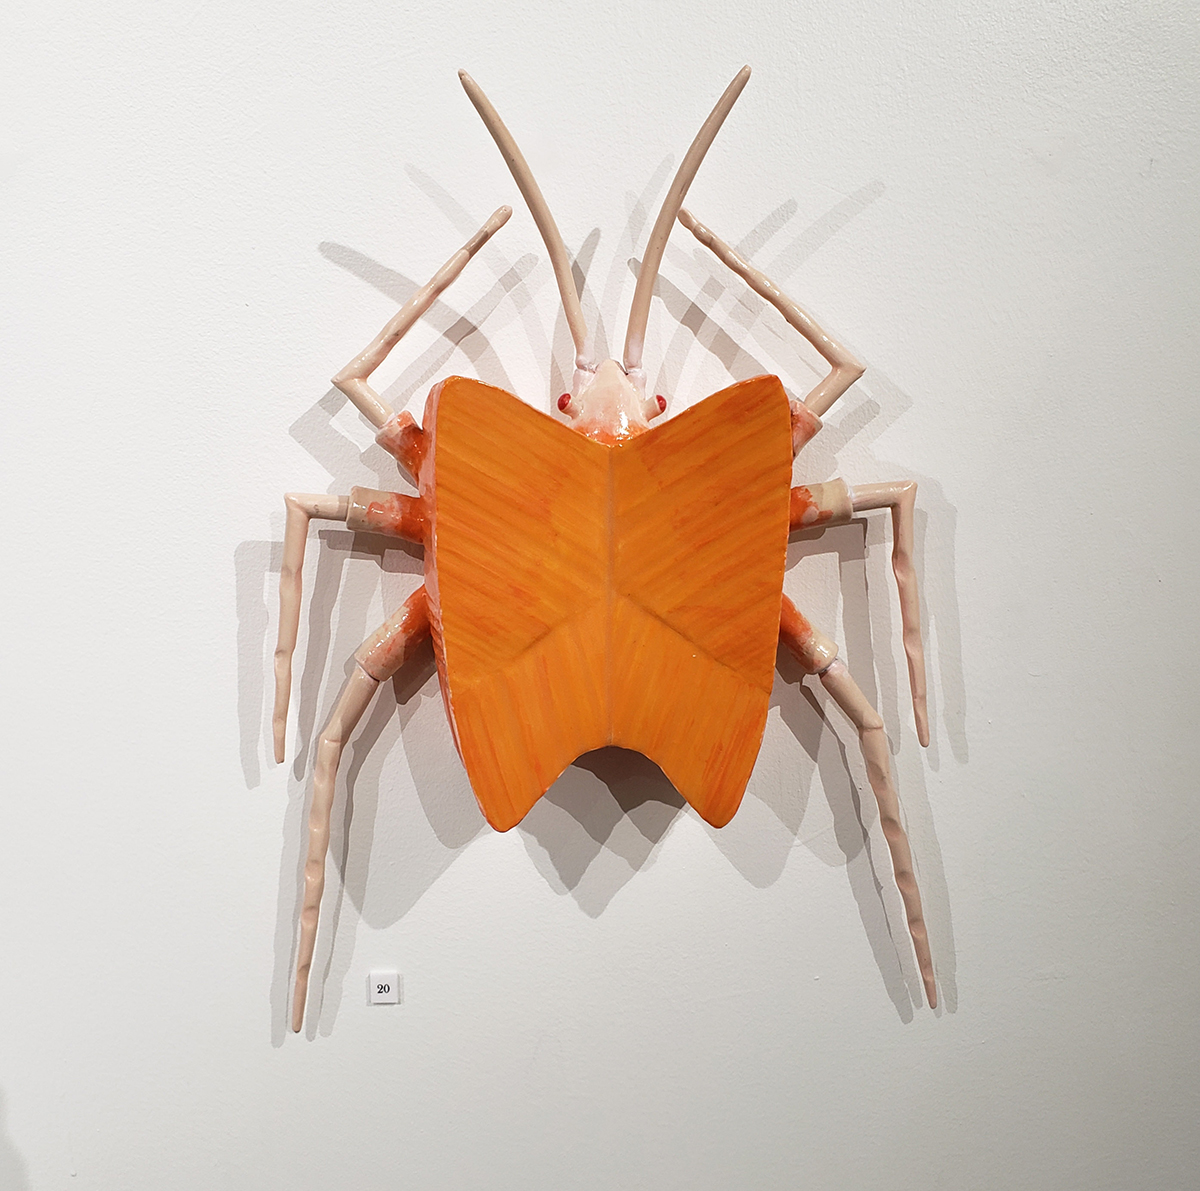 Dr. Mandrakes Wondrous Insects of Morroke, ceramic and mixed media sculpture by Riley McManus.